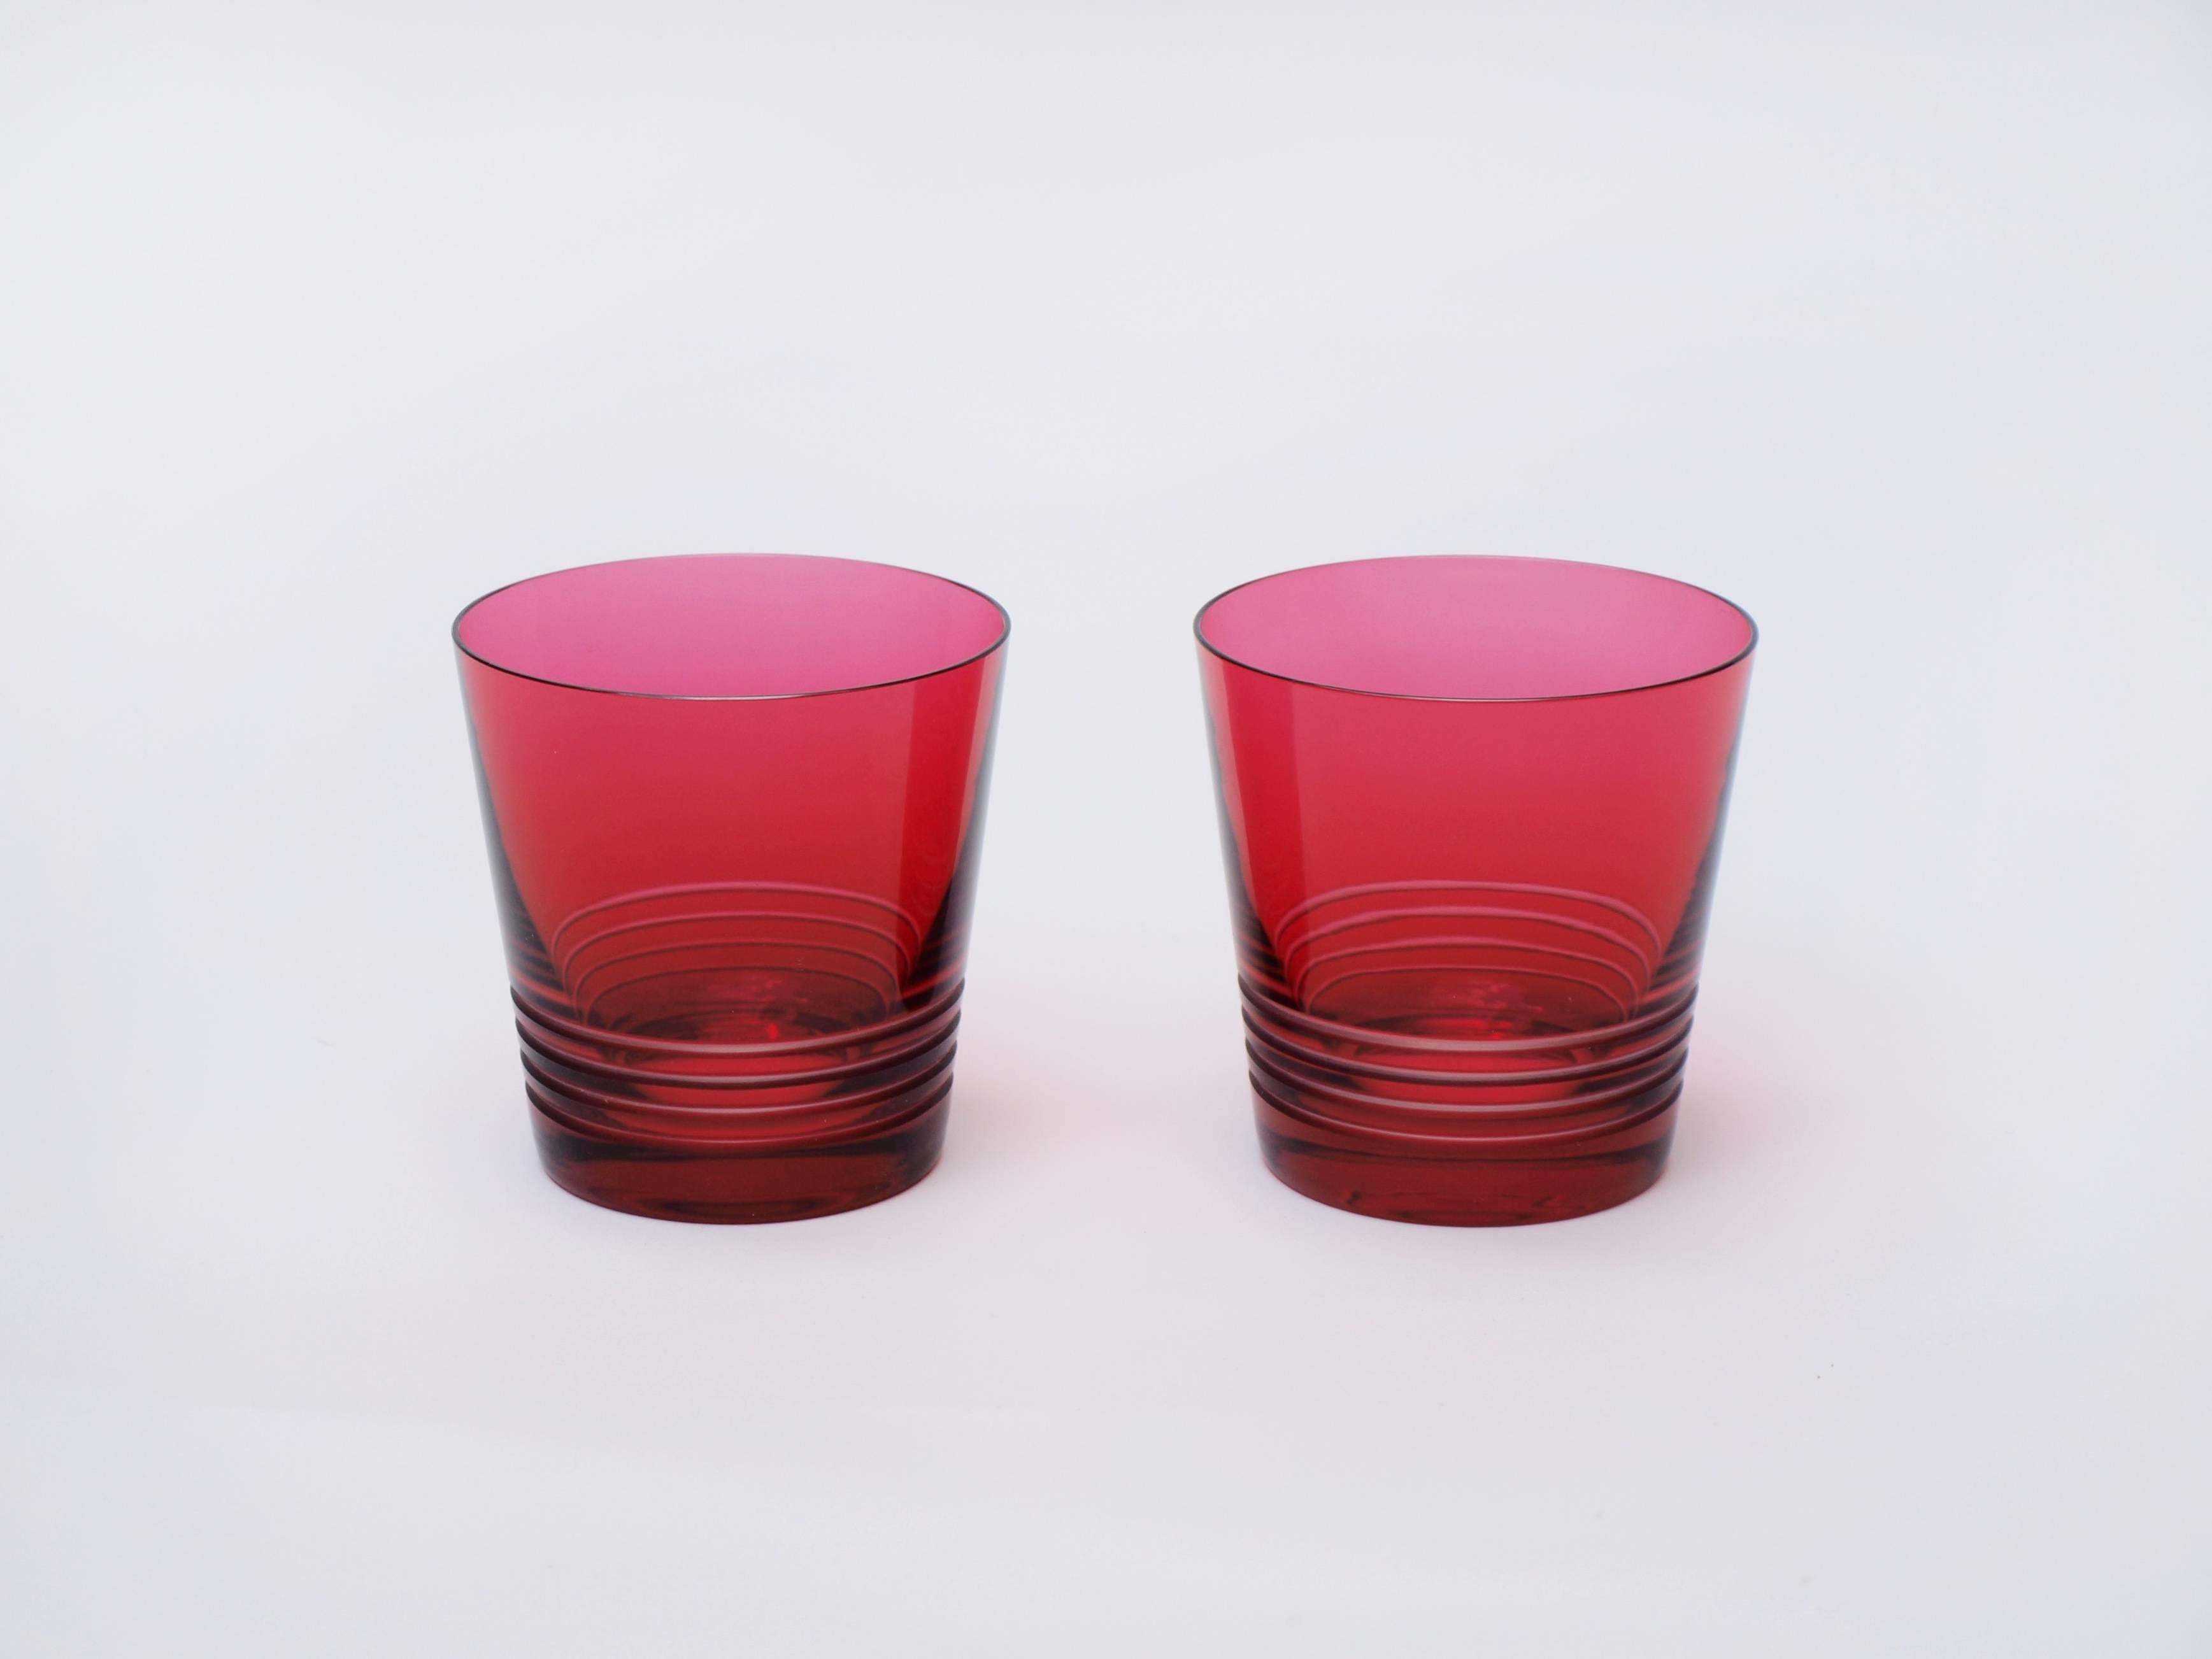 This stylish pair of red tinted crystal whisky tumblers designed by Hermés, are slightly fluted with a linear etched design towards the weighted base.

Diameter at top: 10cm diameter at base 7.5cm, height 10cm.